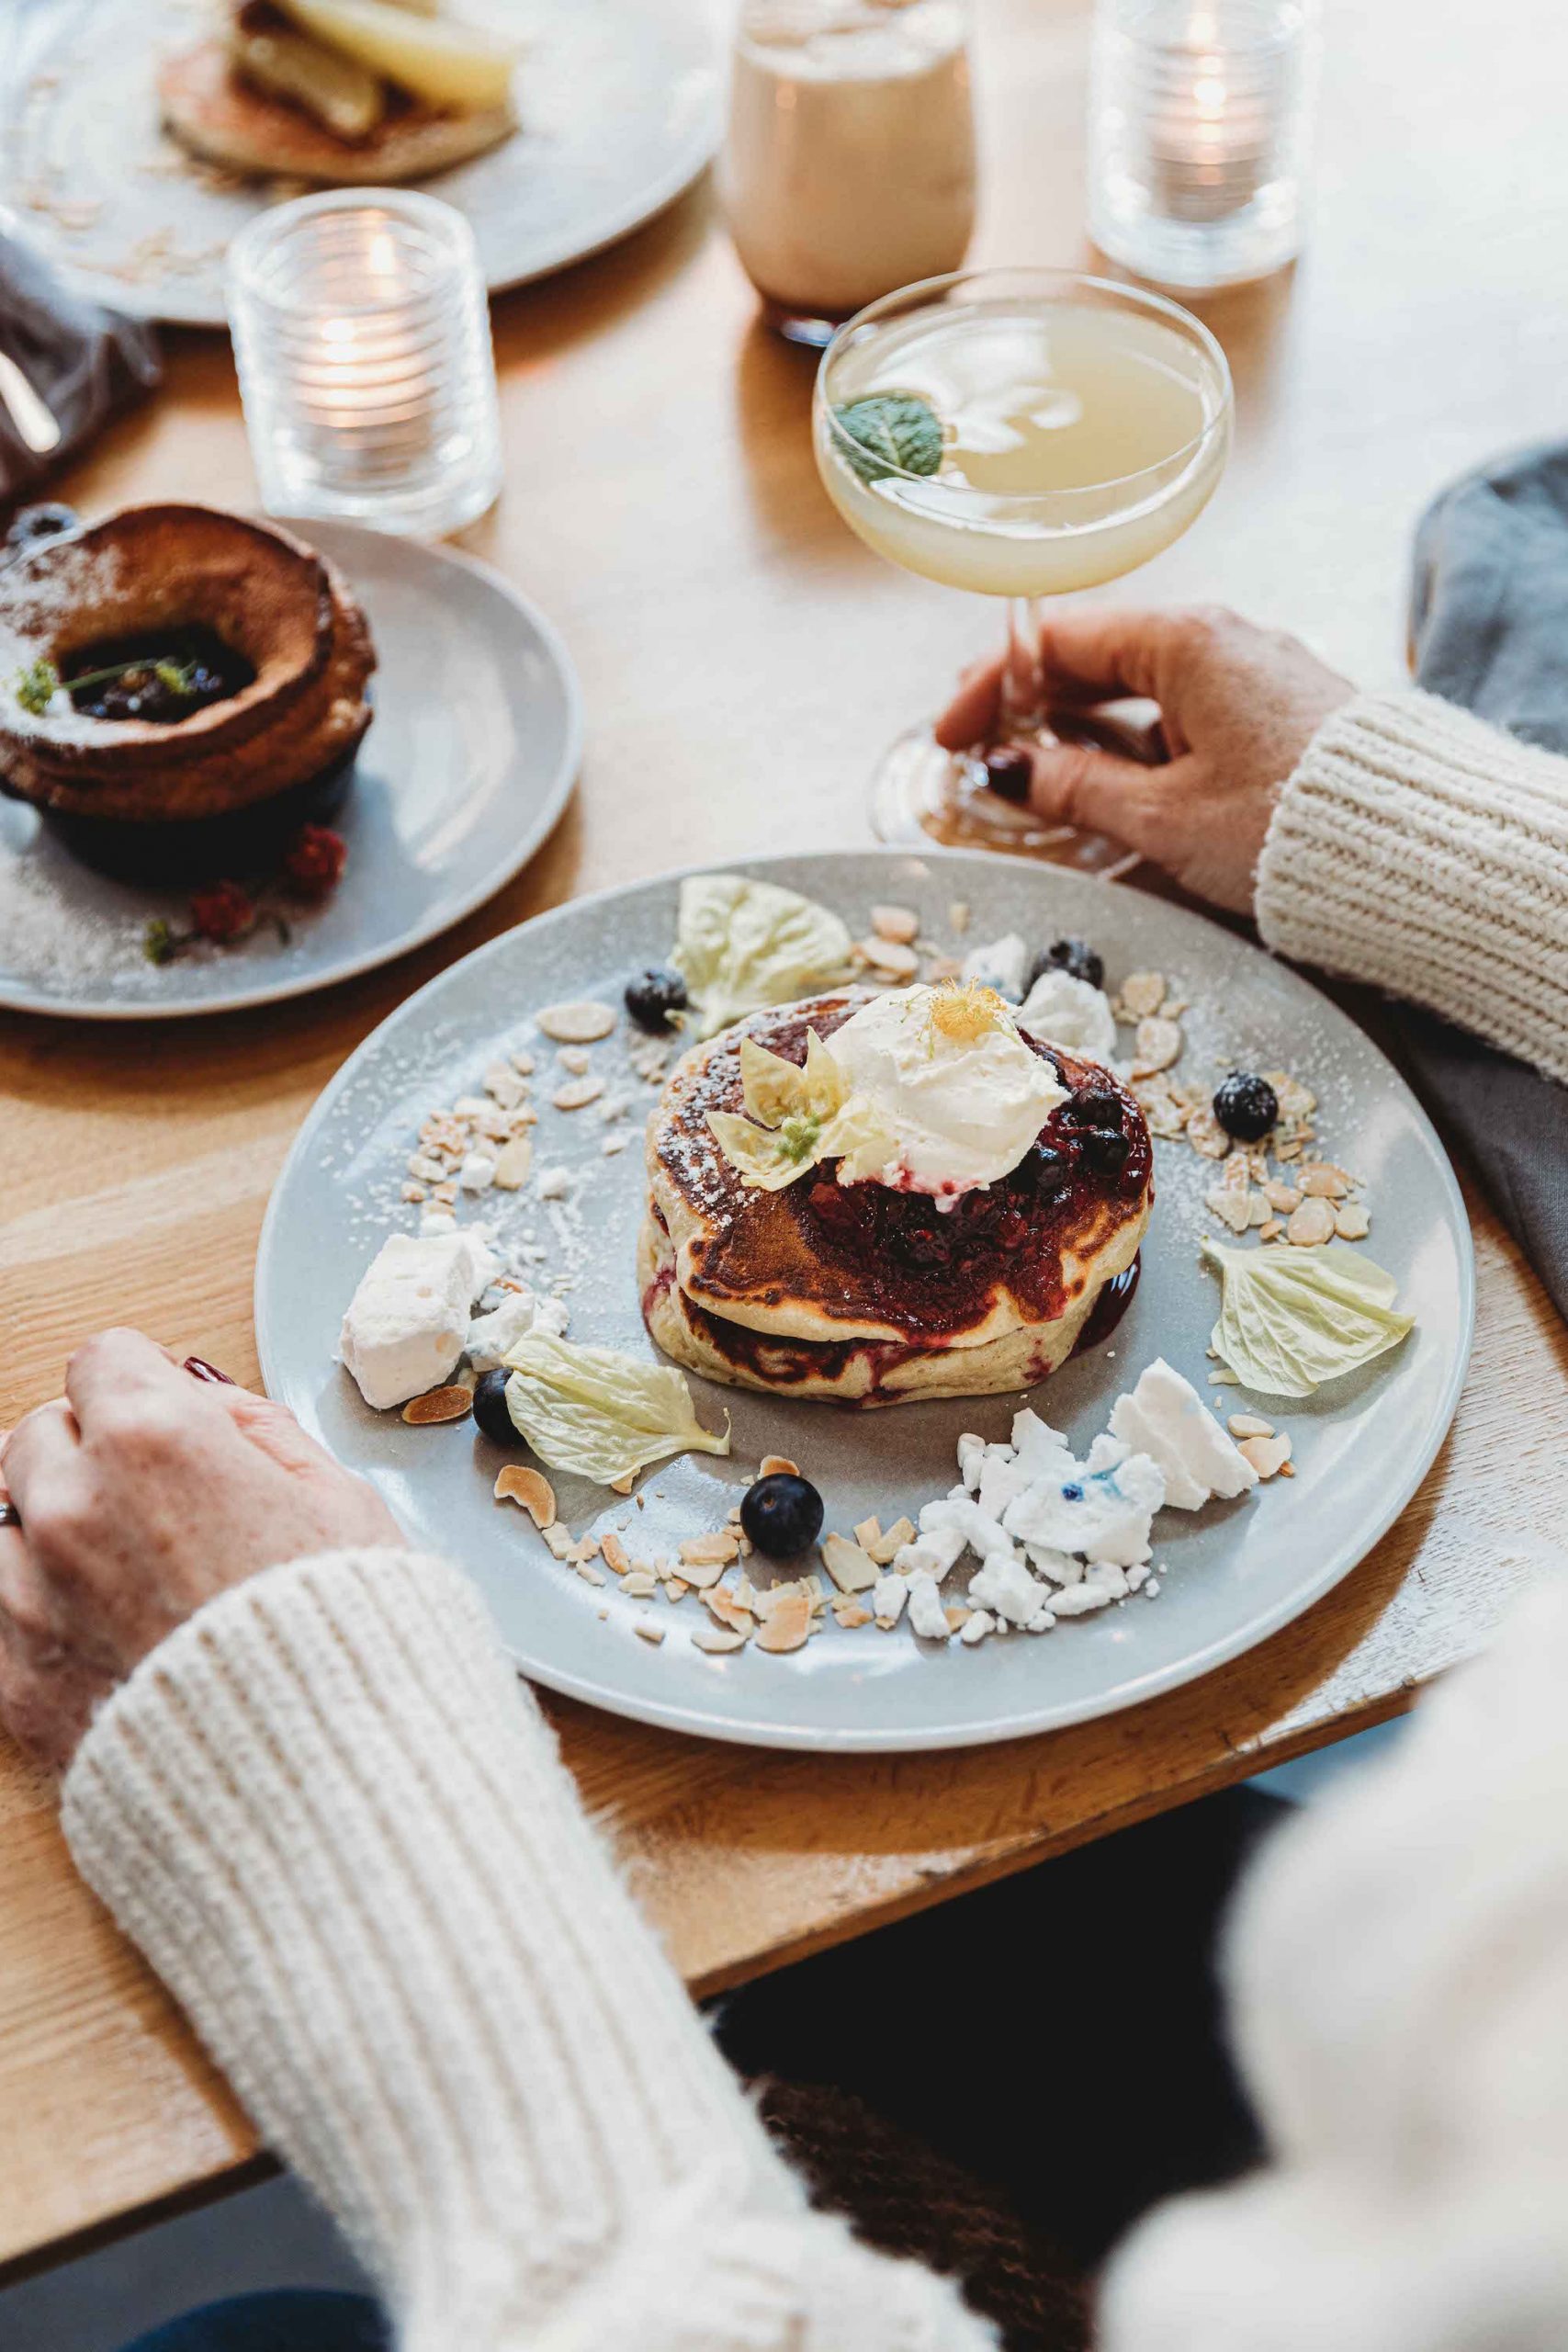 Pancakes and Cocktails. Your Bankside Day Date - 2 people in UK